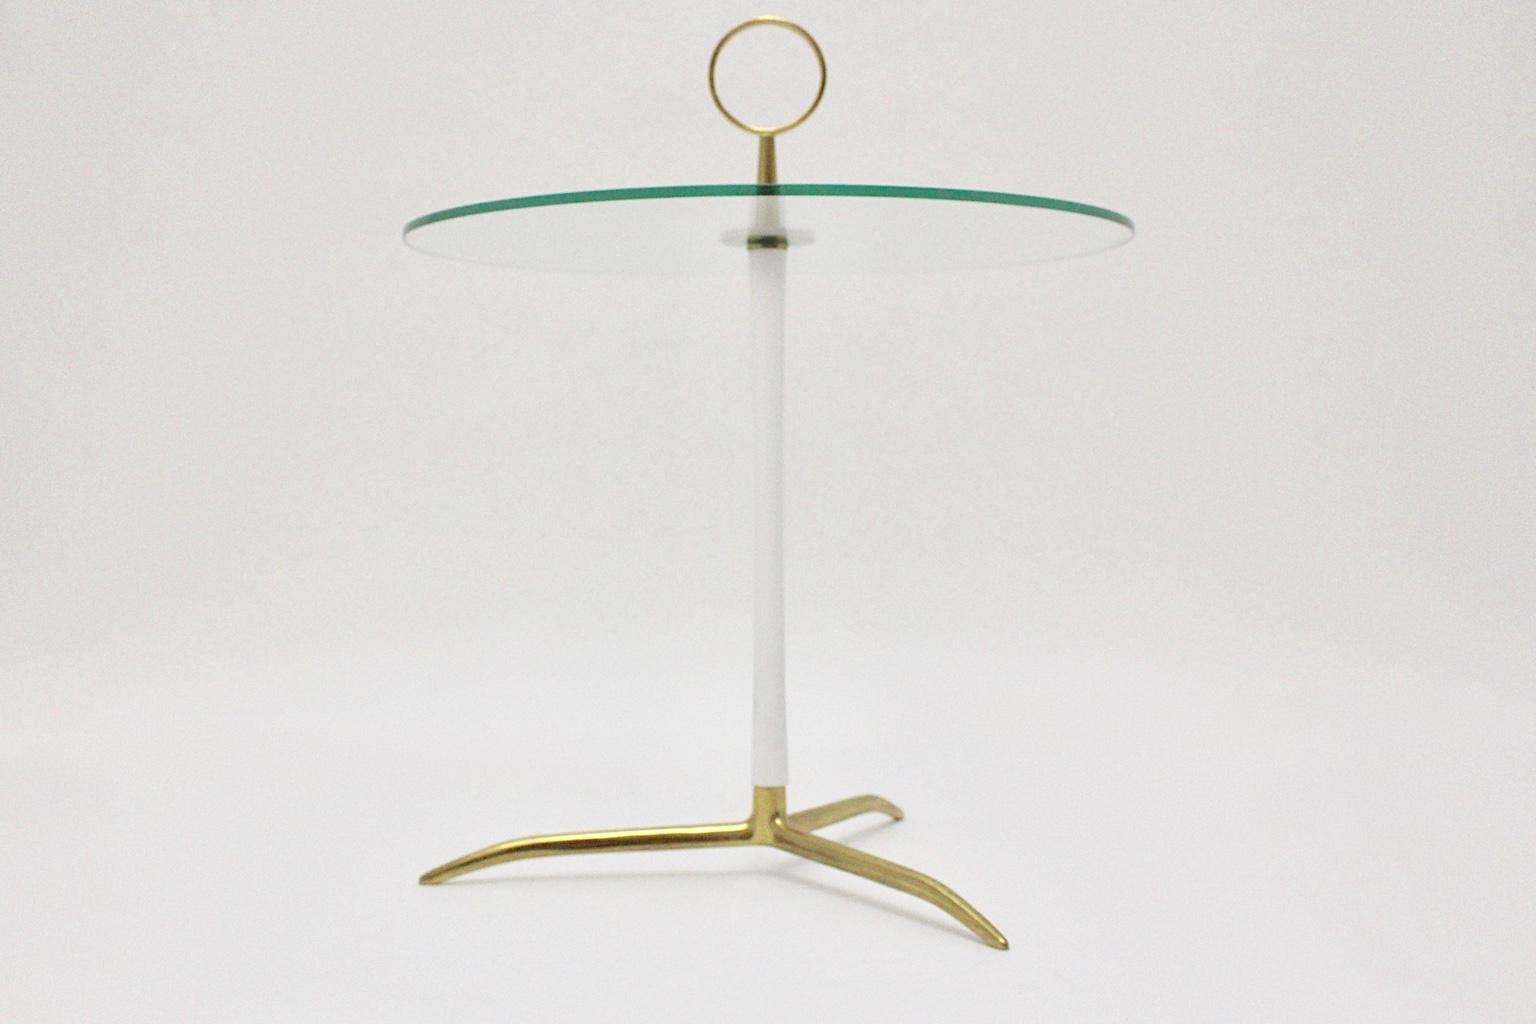 A charming Mid-Century Modern tripod round side table or coffee table with a brass base, which fits in a white lacquered metal stem and a round brass handle. The coffee table is topped with a round clear glass plate.
The overall condition is very